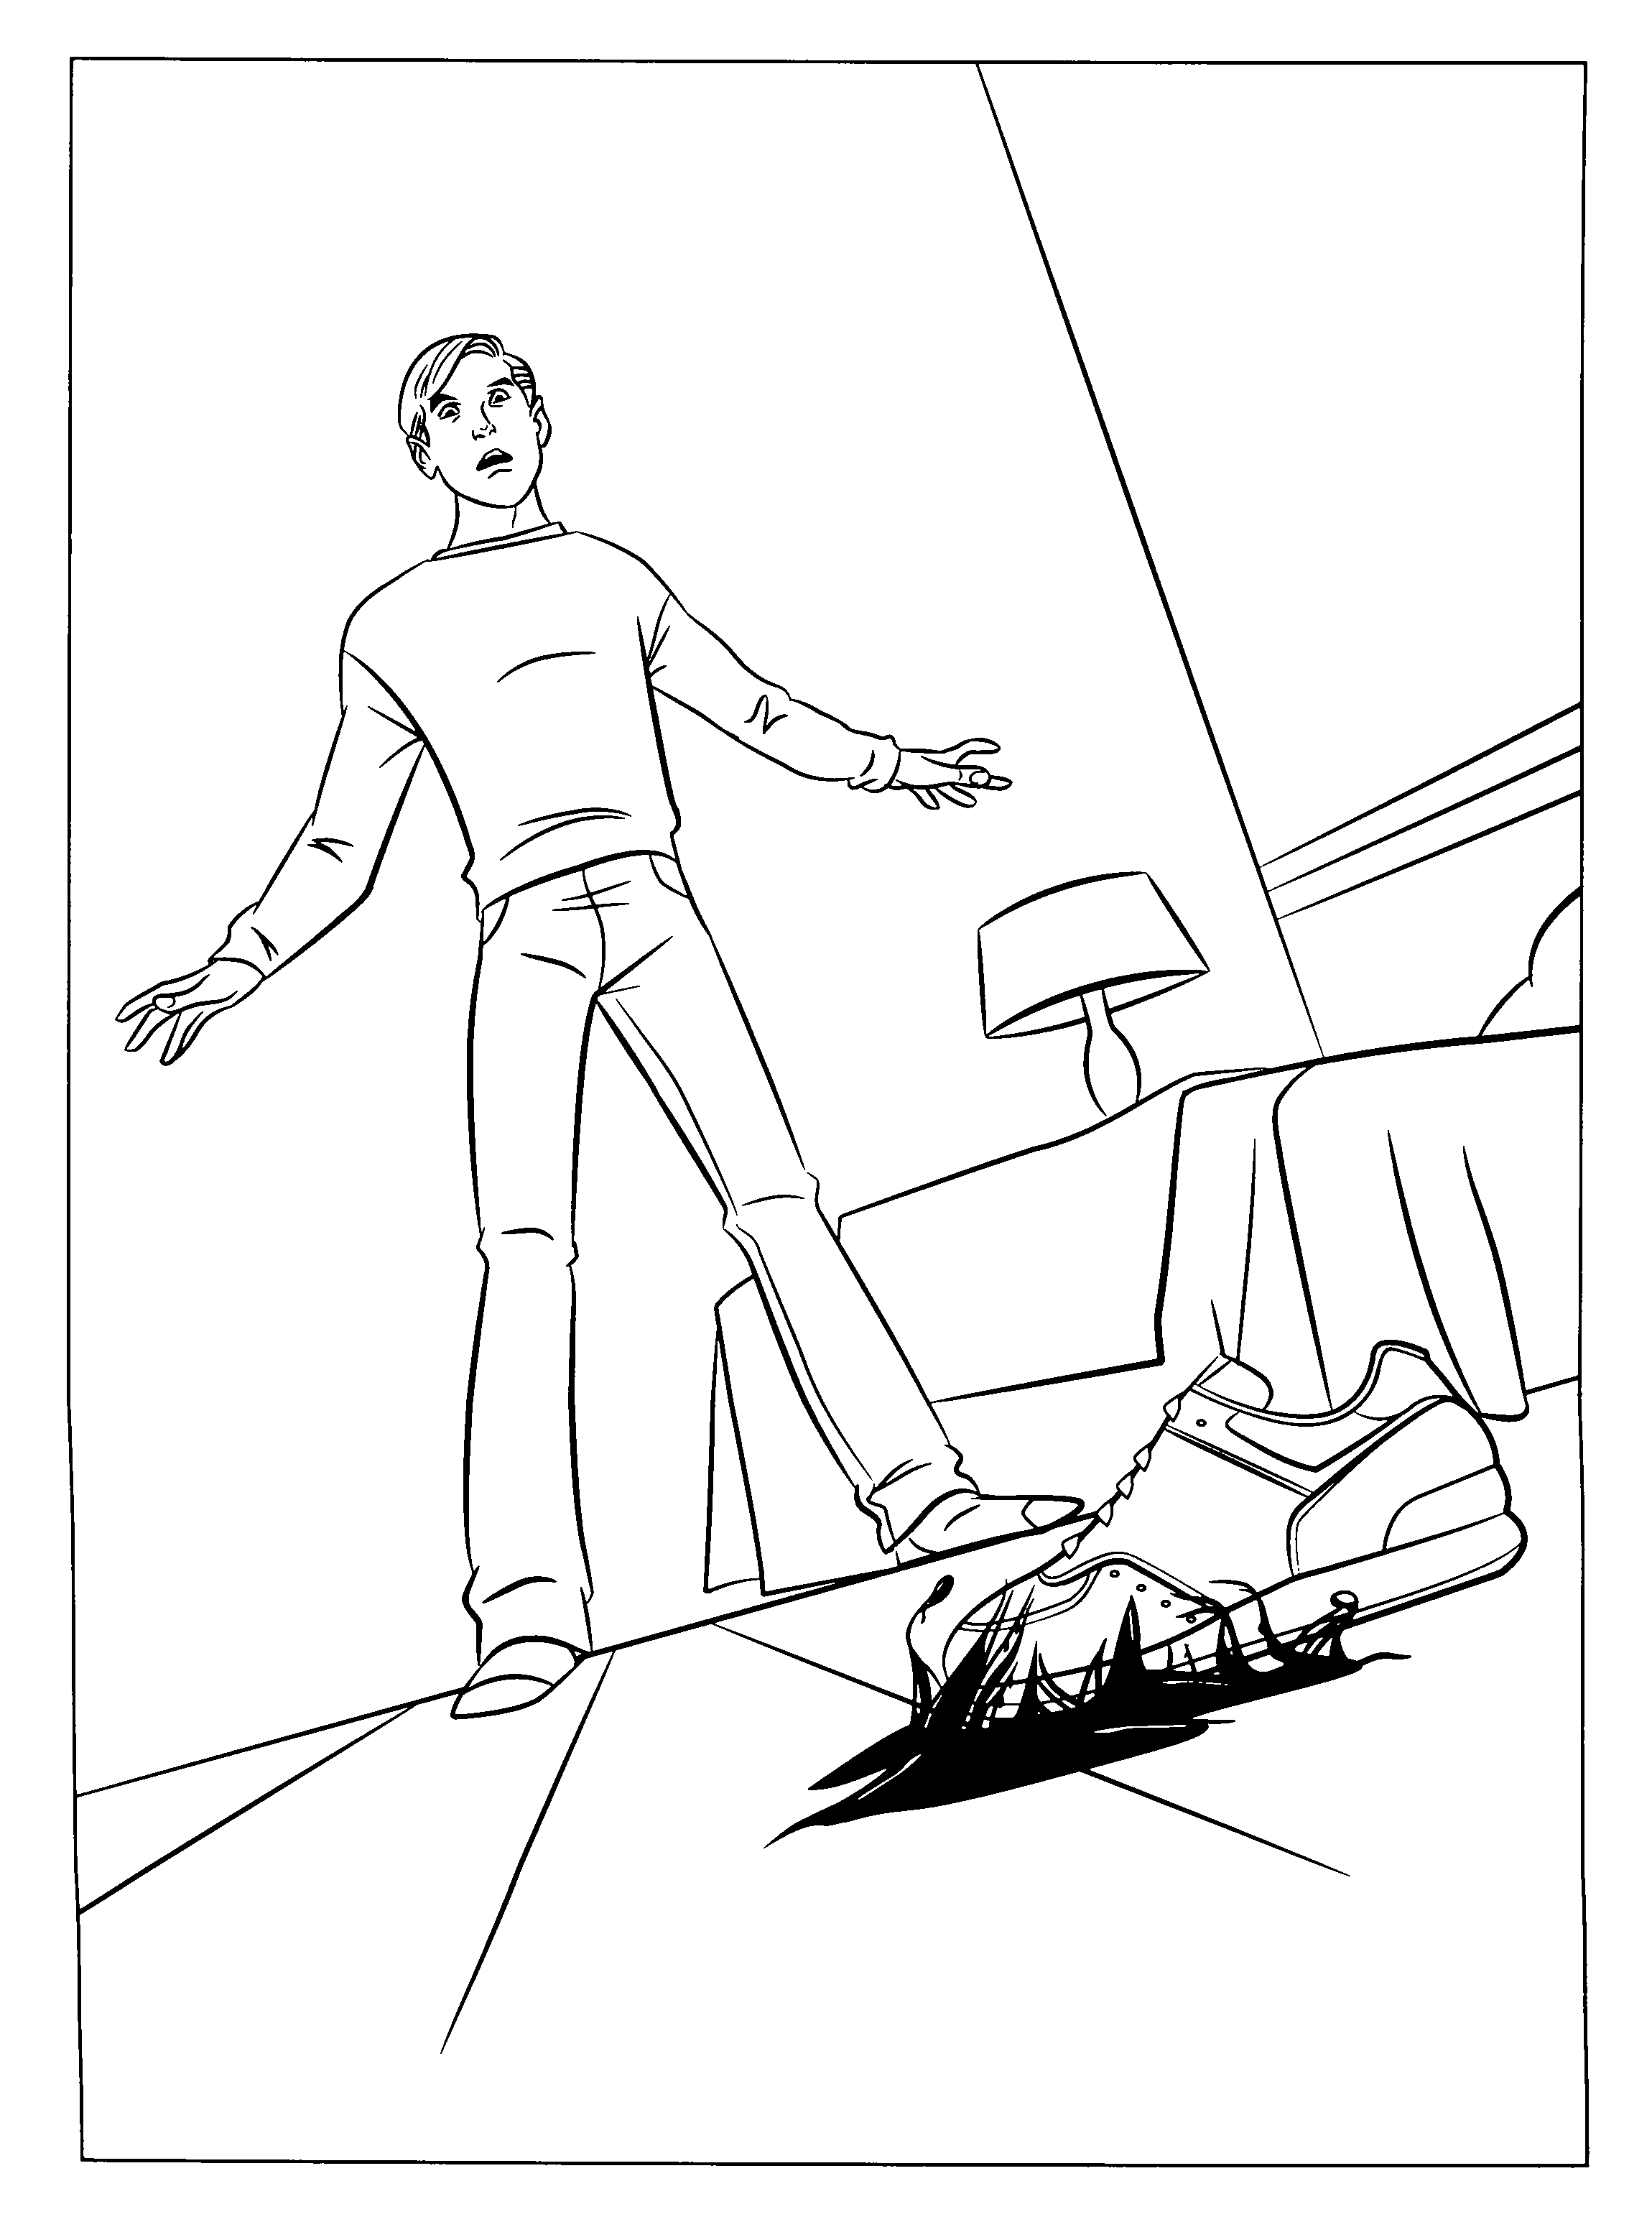 Coloring Page - Spiderman 3 coloring pages 12